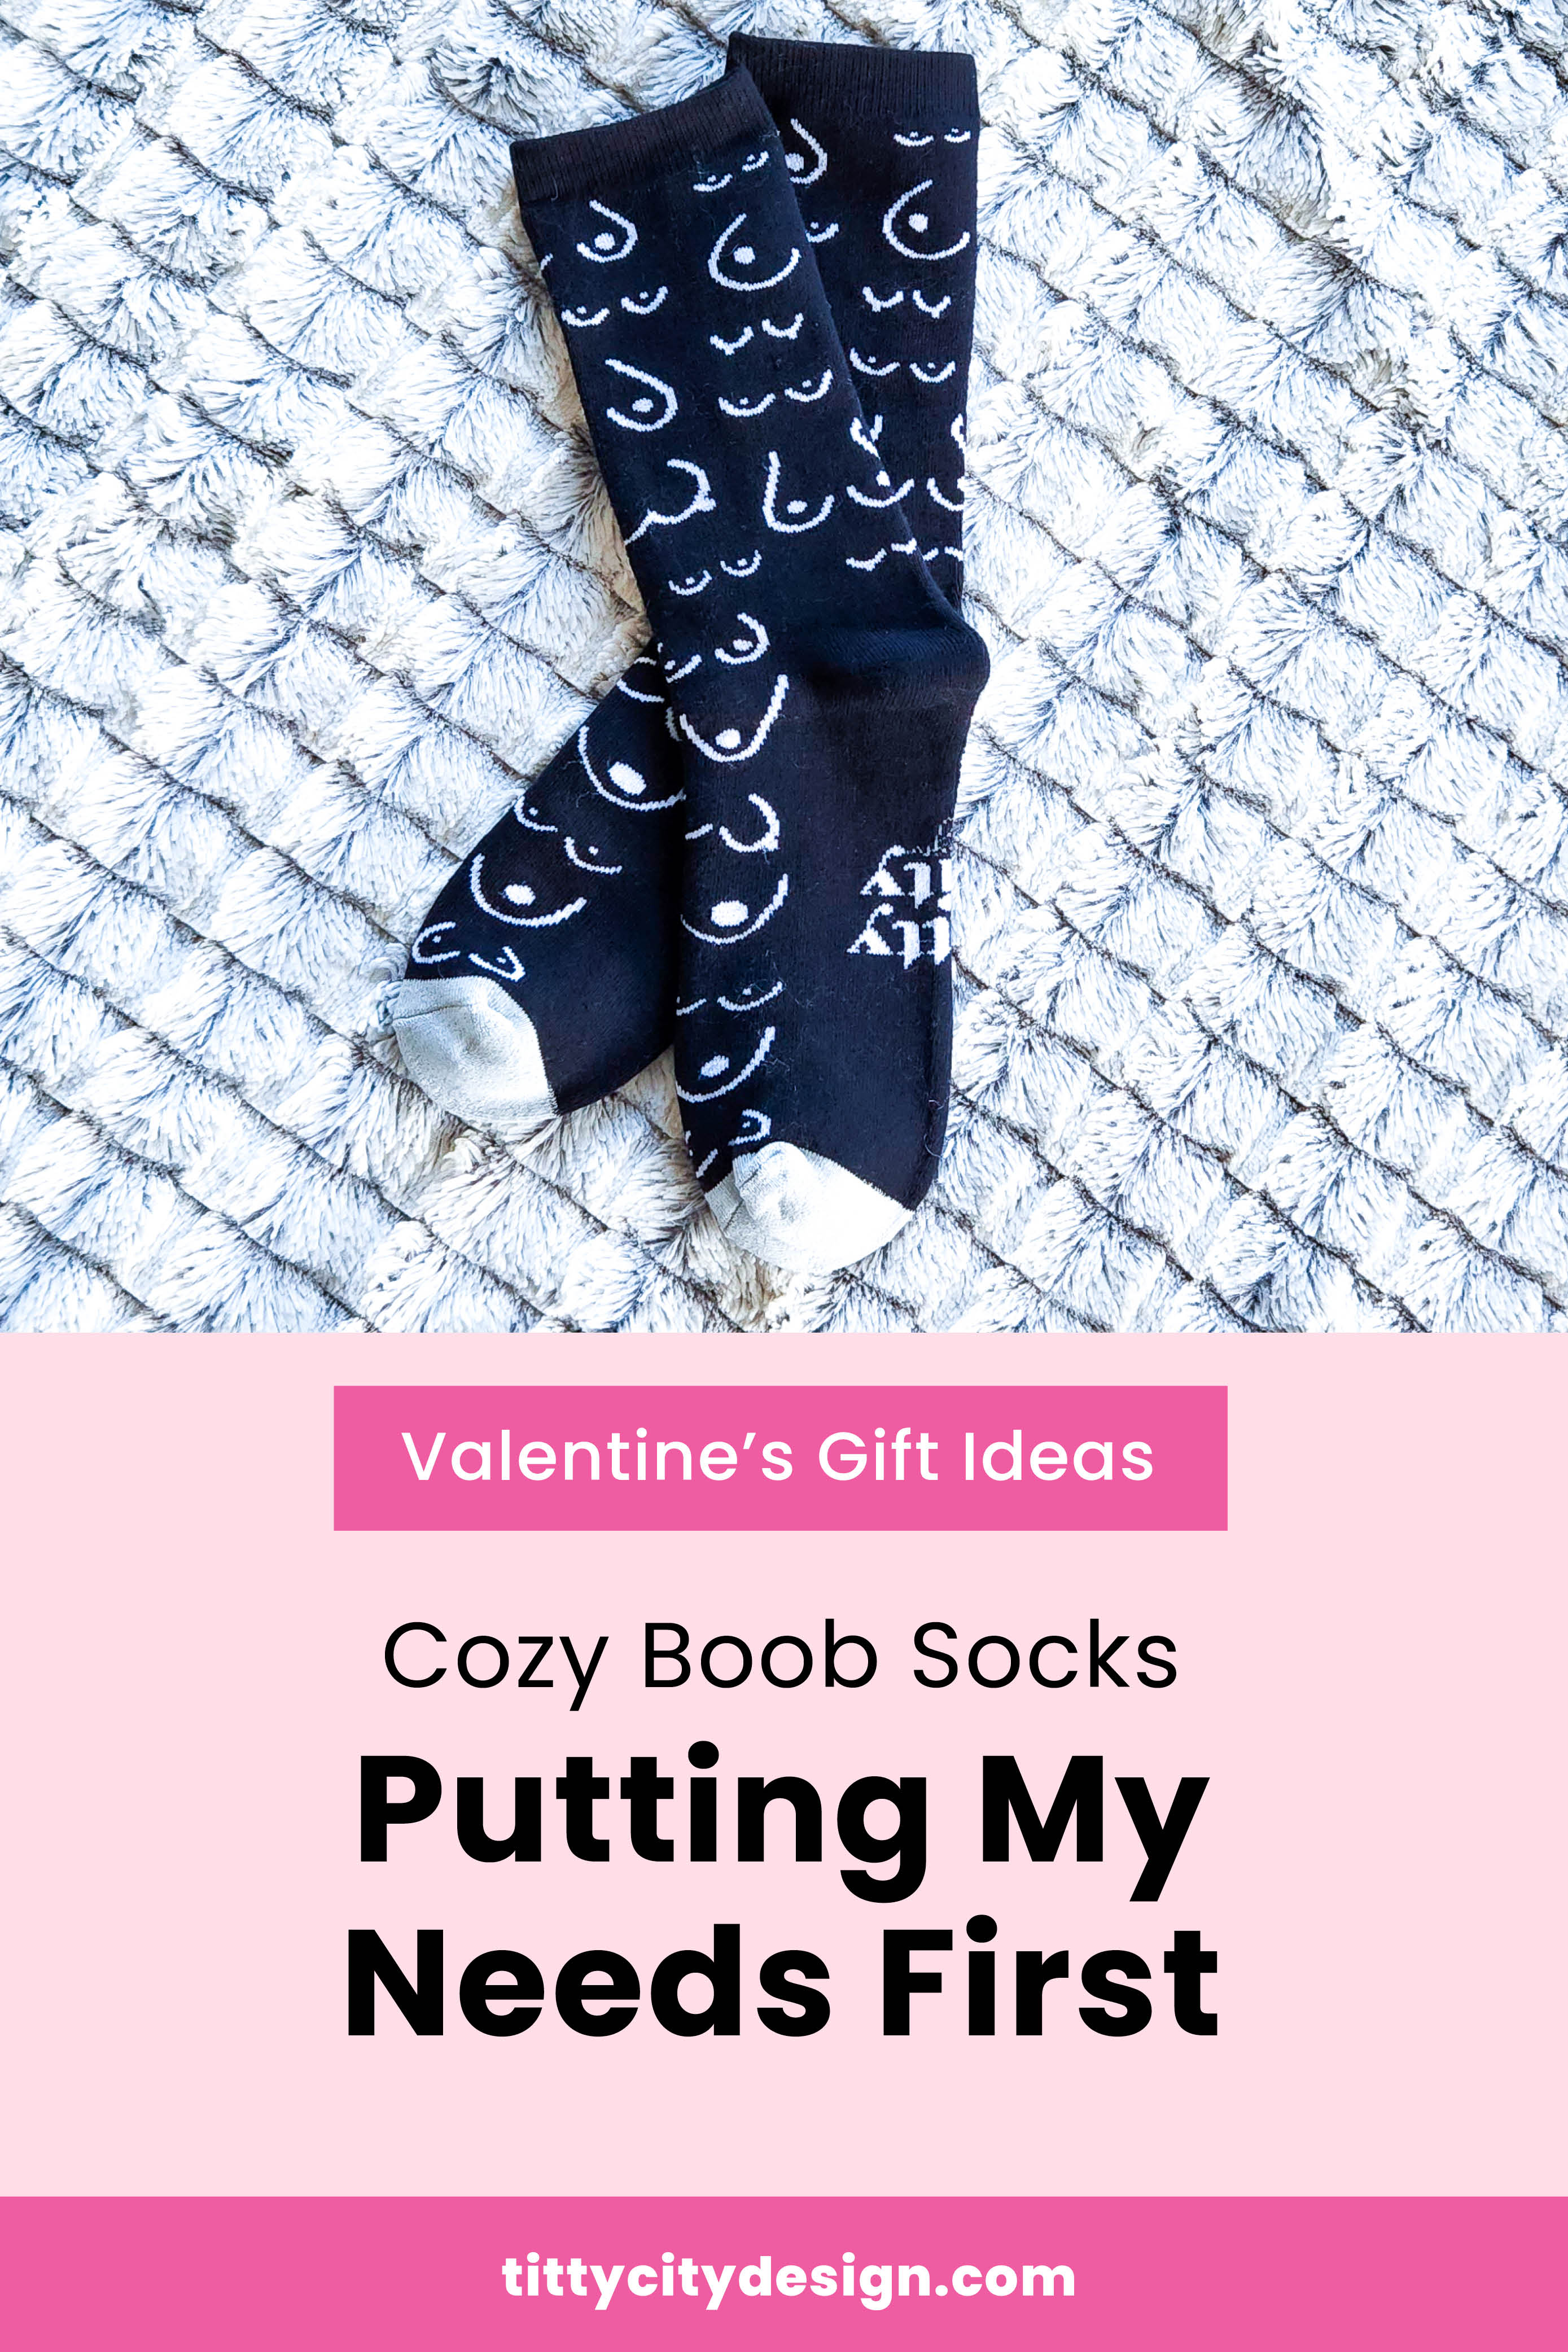 Valentines Gift Ideas - Black and White Cozy Boob Socks "Putting my Needs First"